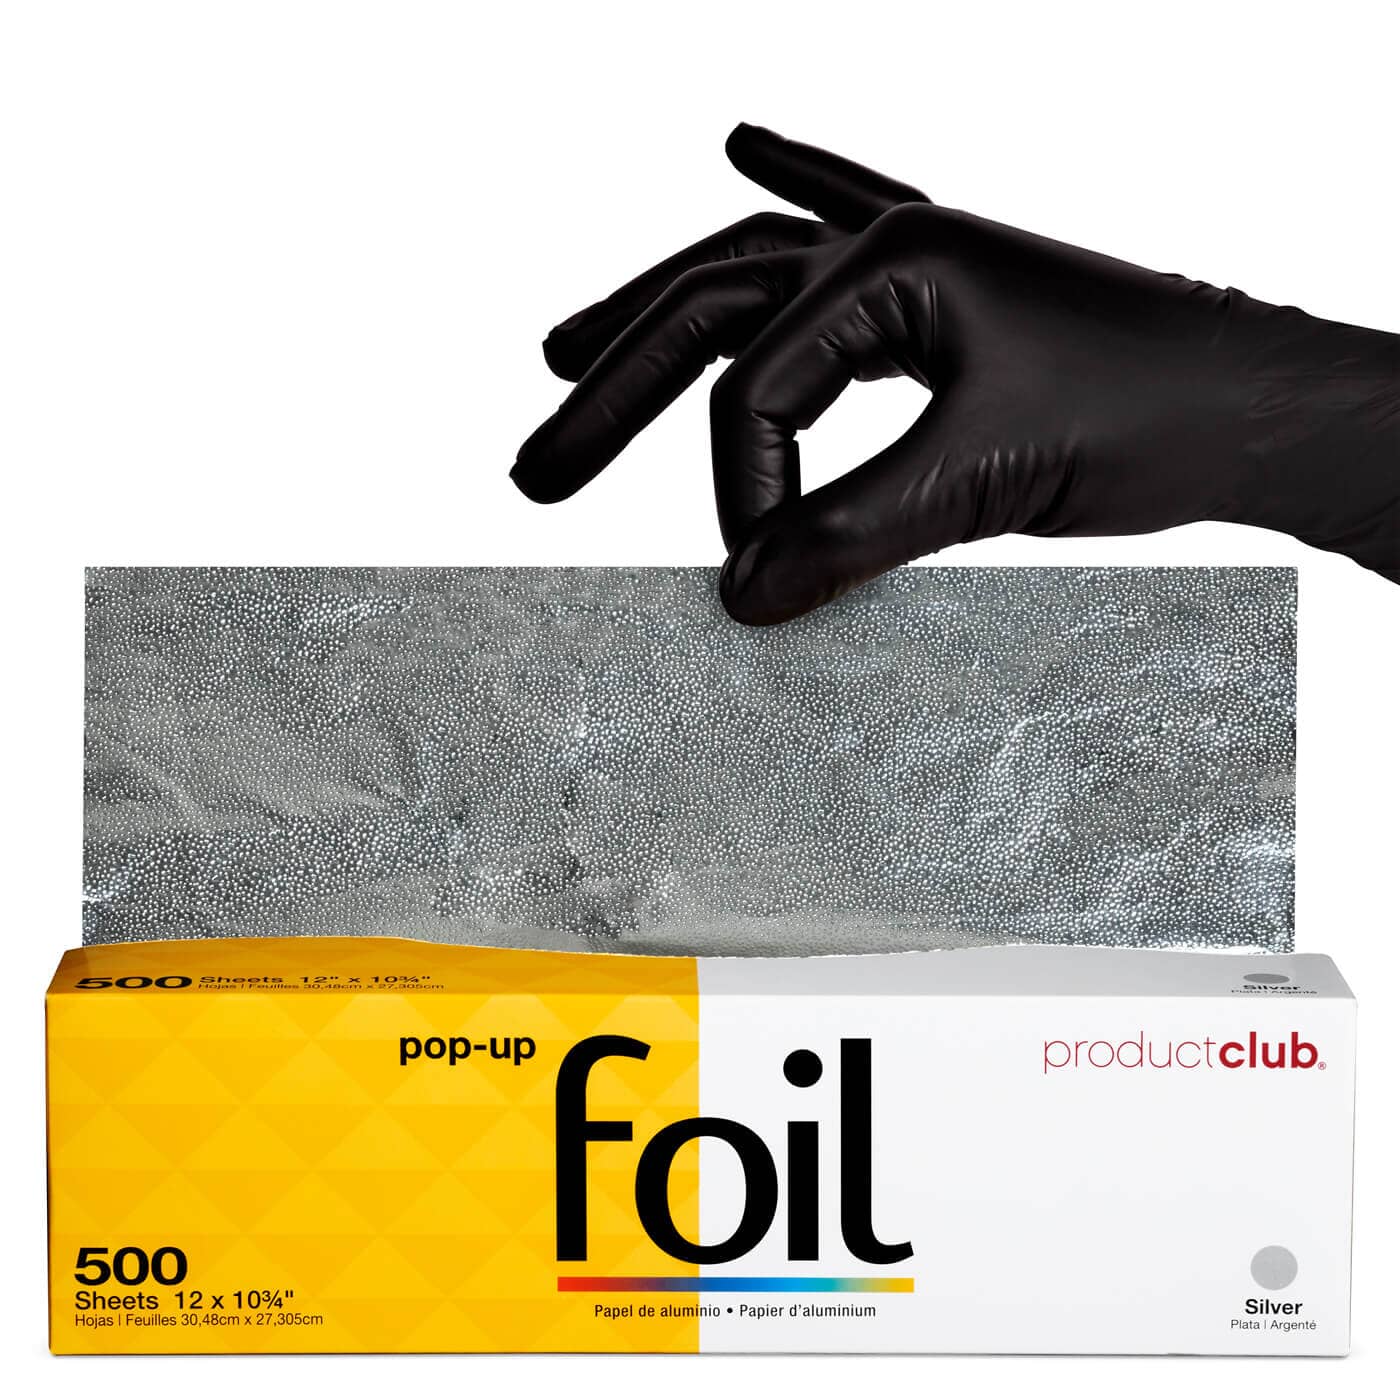 Pop-Up 500 Sheets | 12" x 10 3/4" | Silver | FS300 | Product Club HAIR COLORING ACCESSORIES PRODUCT CLUB 